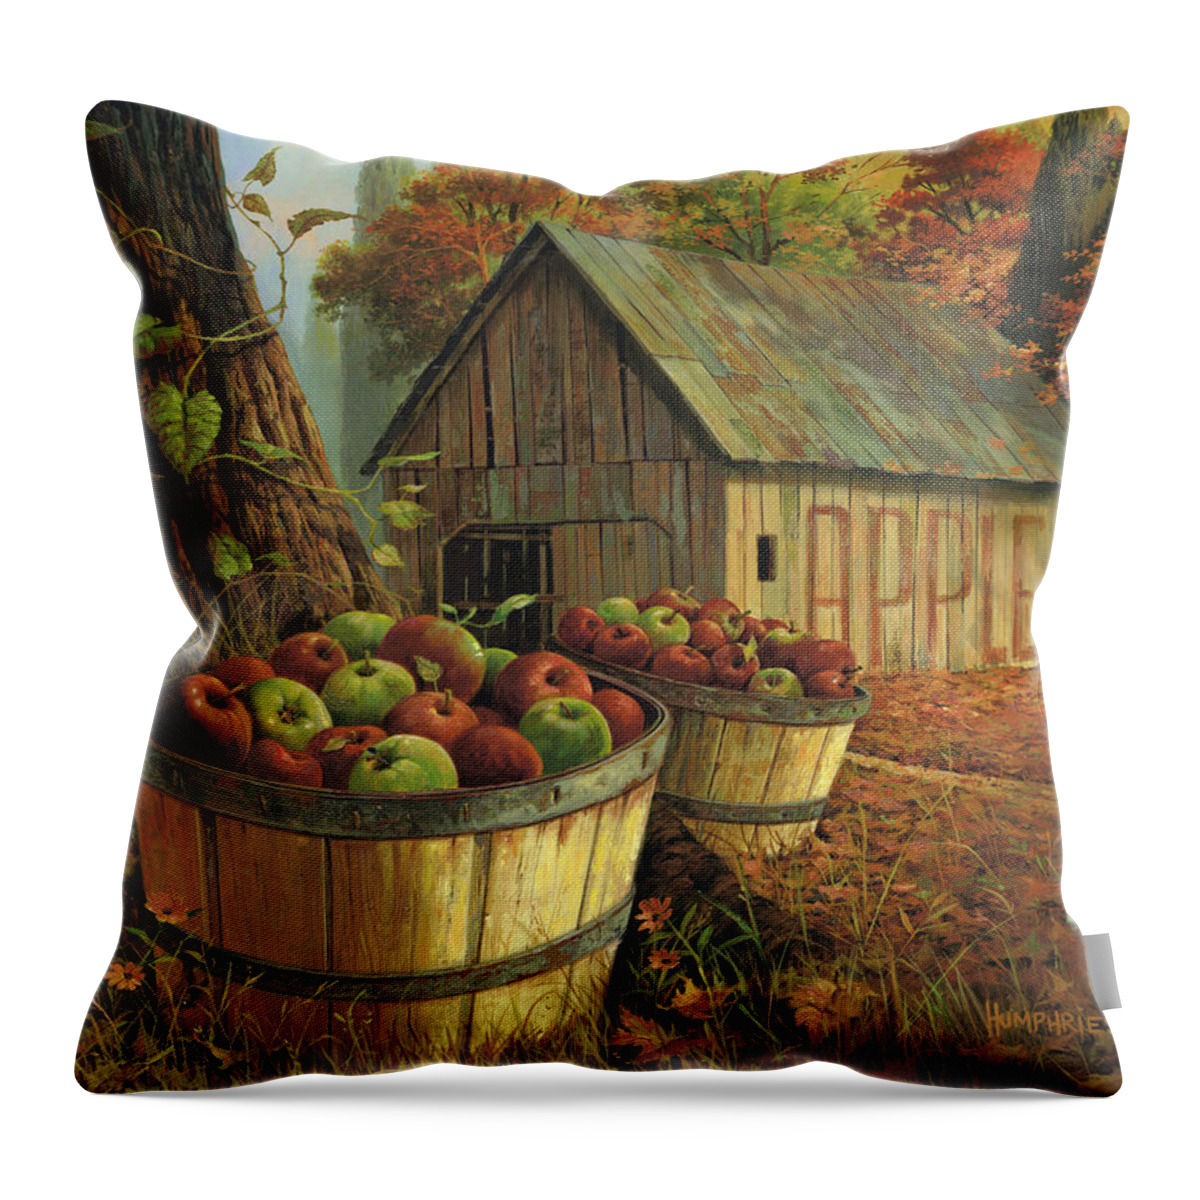 Michael Humphries Throw Pillow featuring the painting Gold Country by Michael Humphries